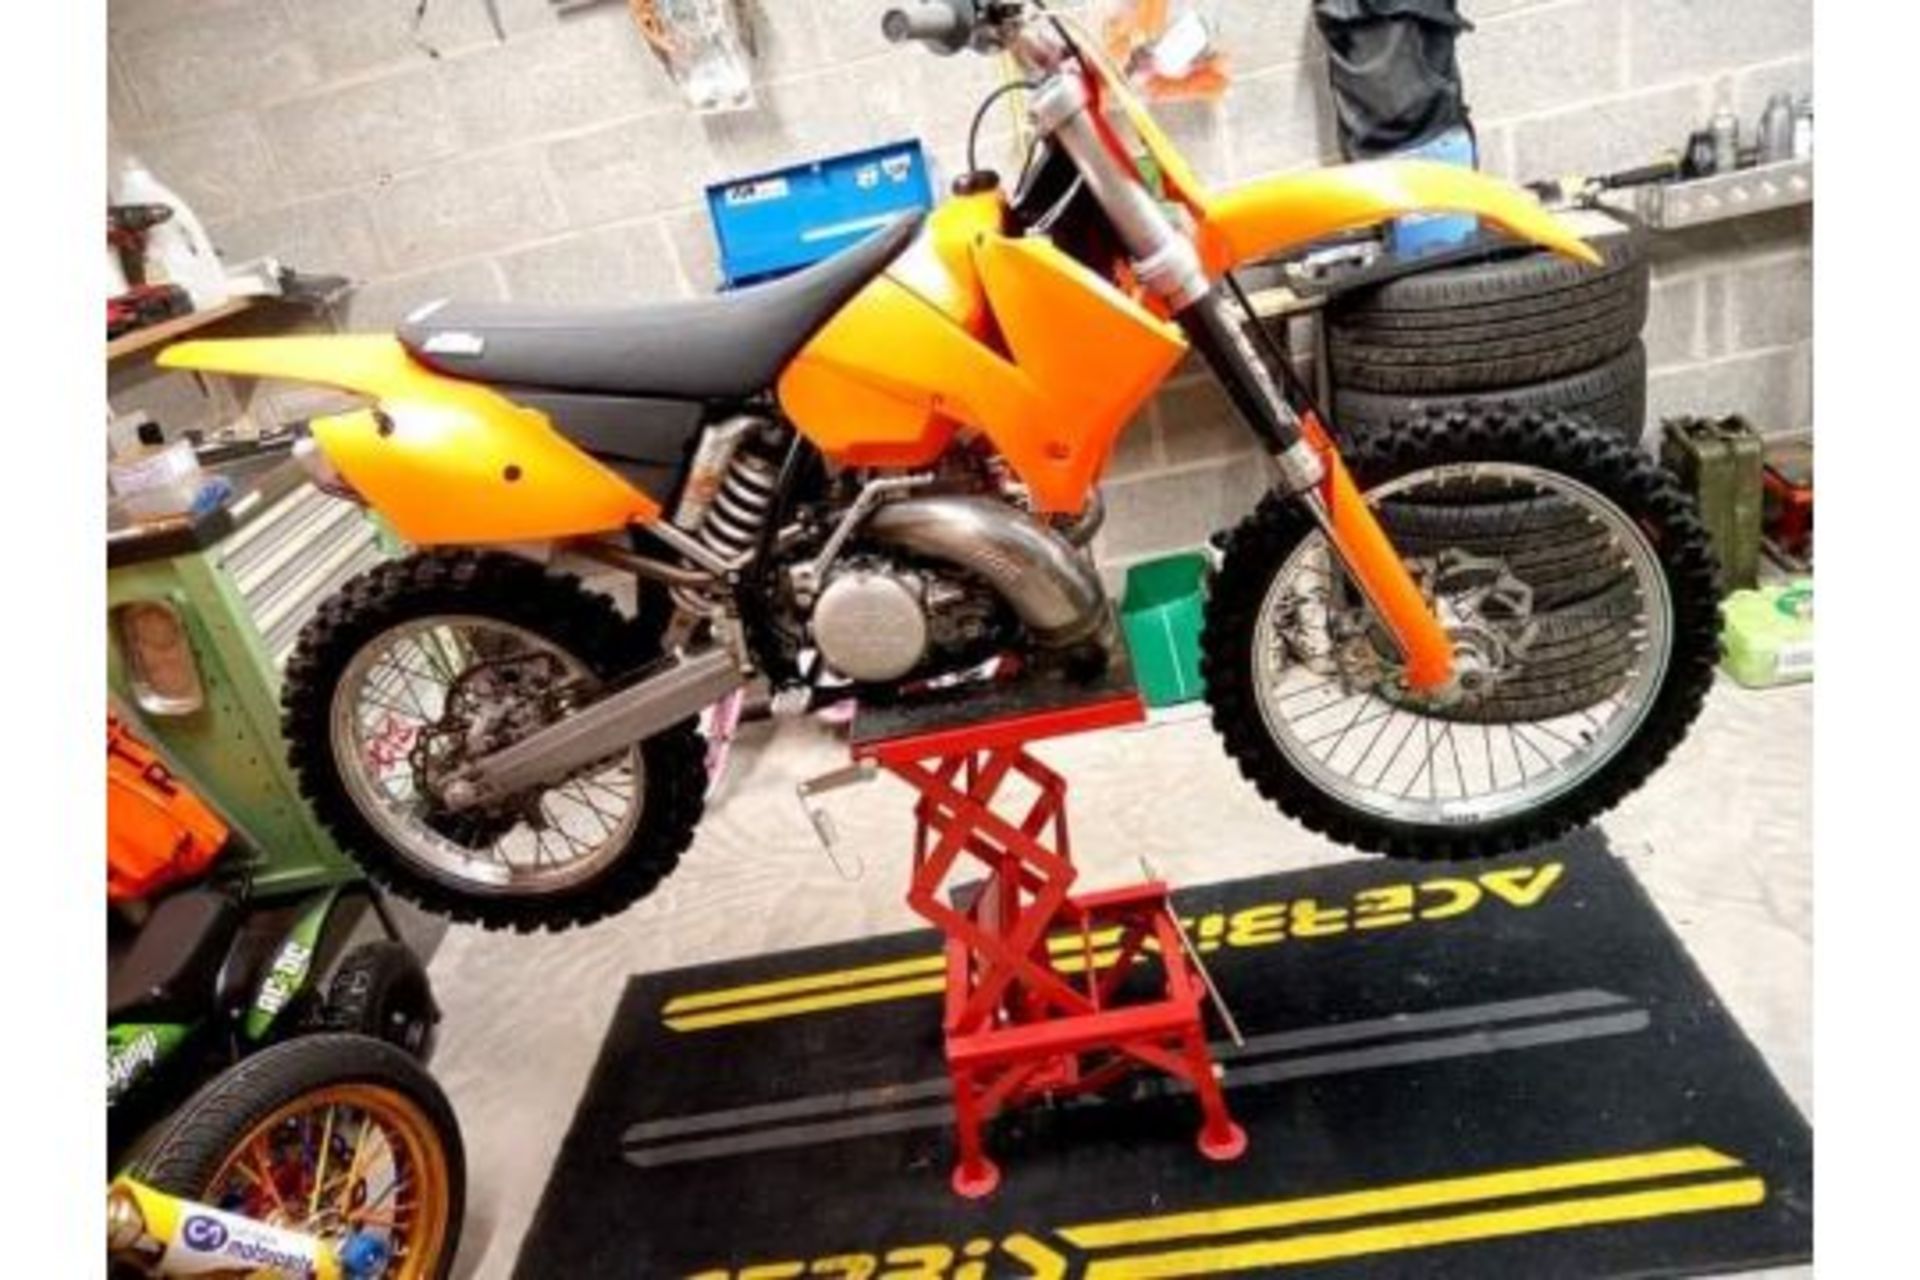 2006 KTM 250 SX JUST HAD A FULL REBUILD  FULL ENGINE OVERHAUL  ALL NEW KTM NUTS AND BOLTS